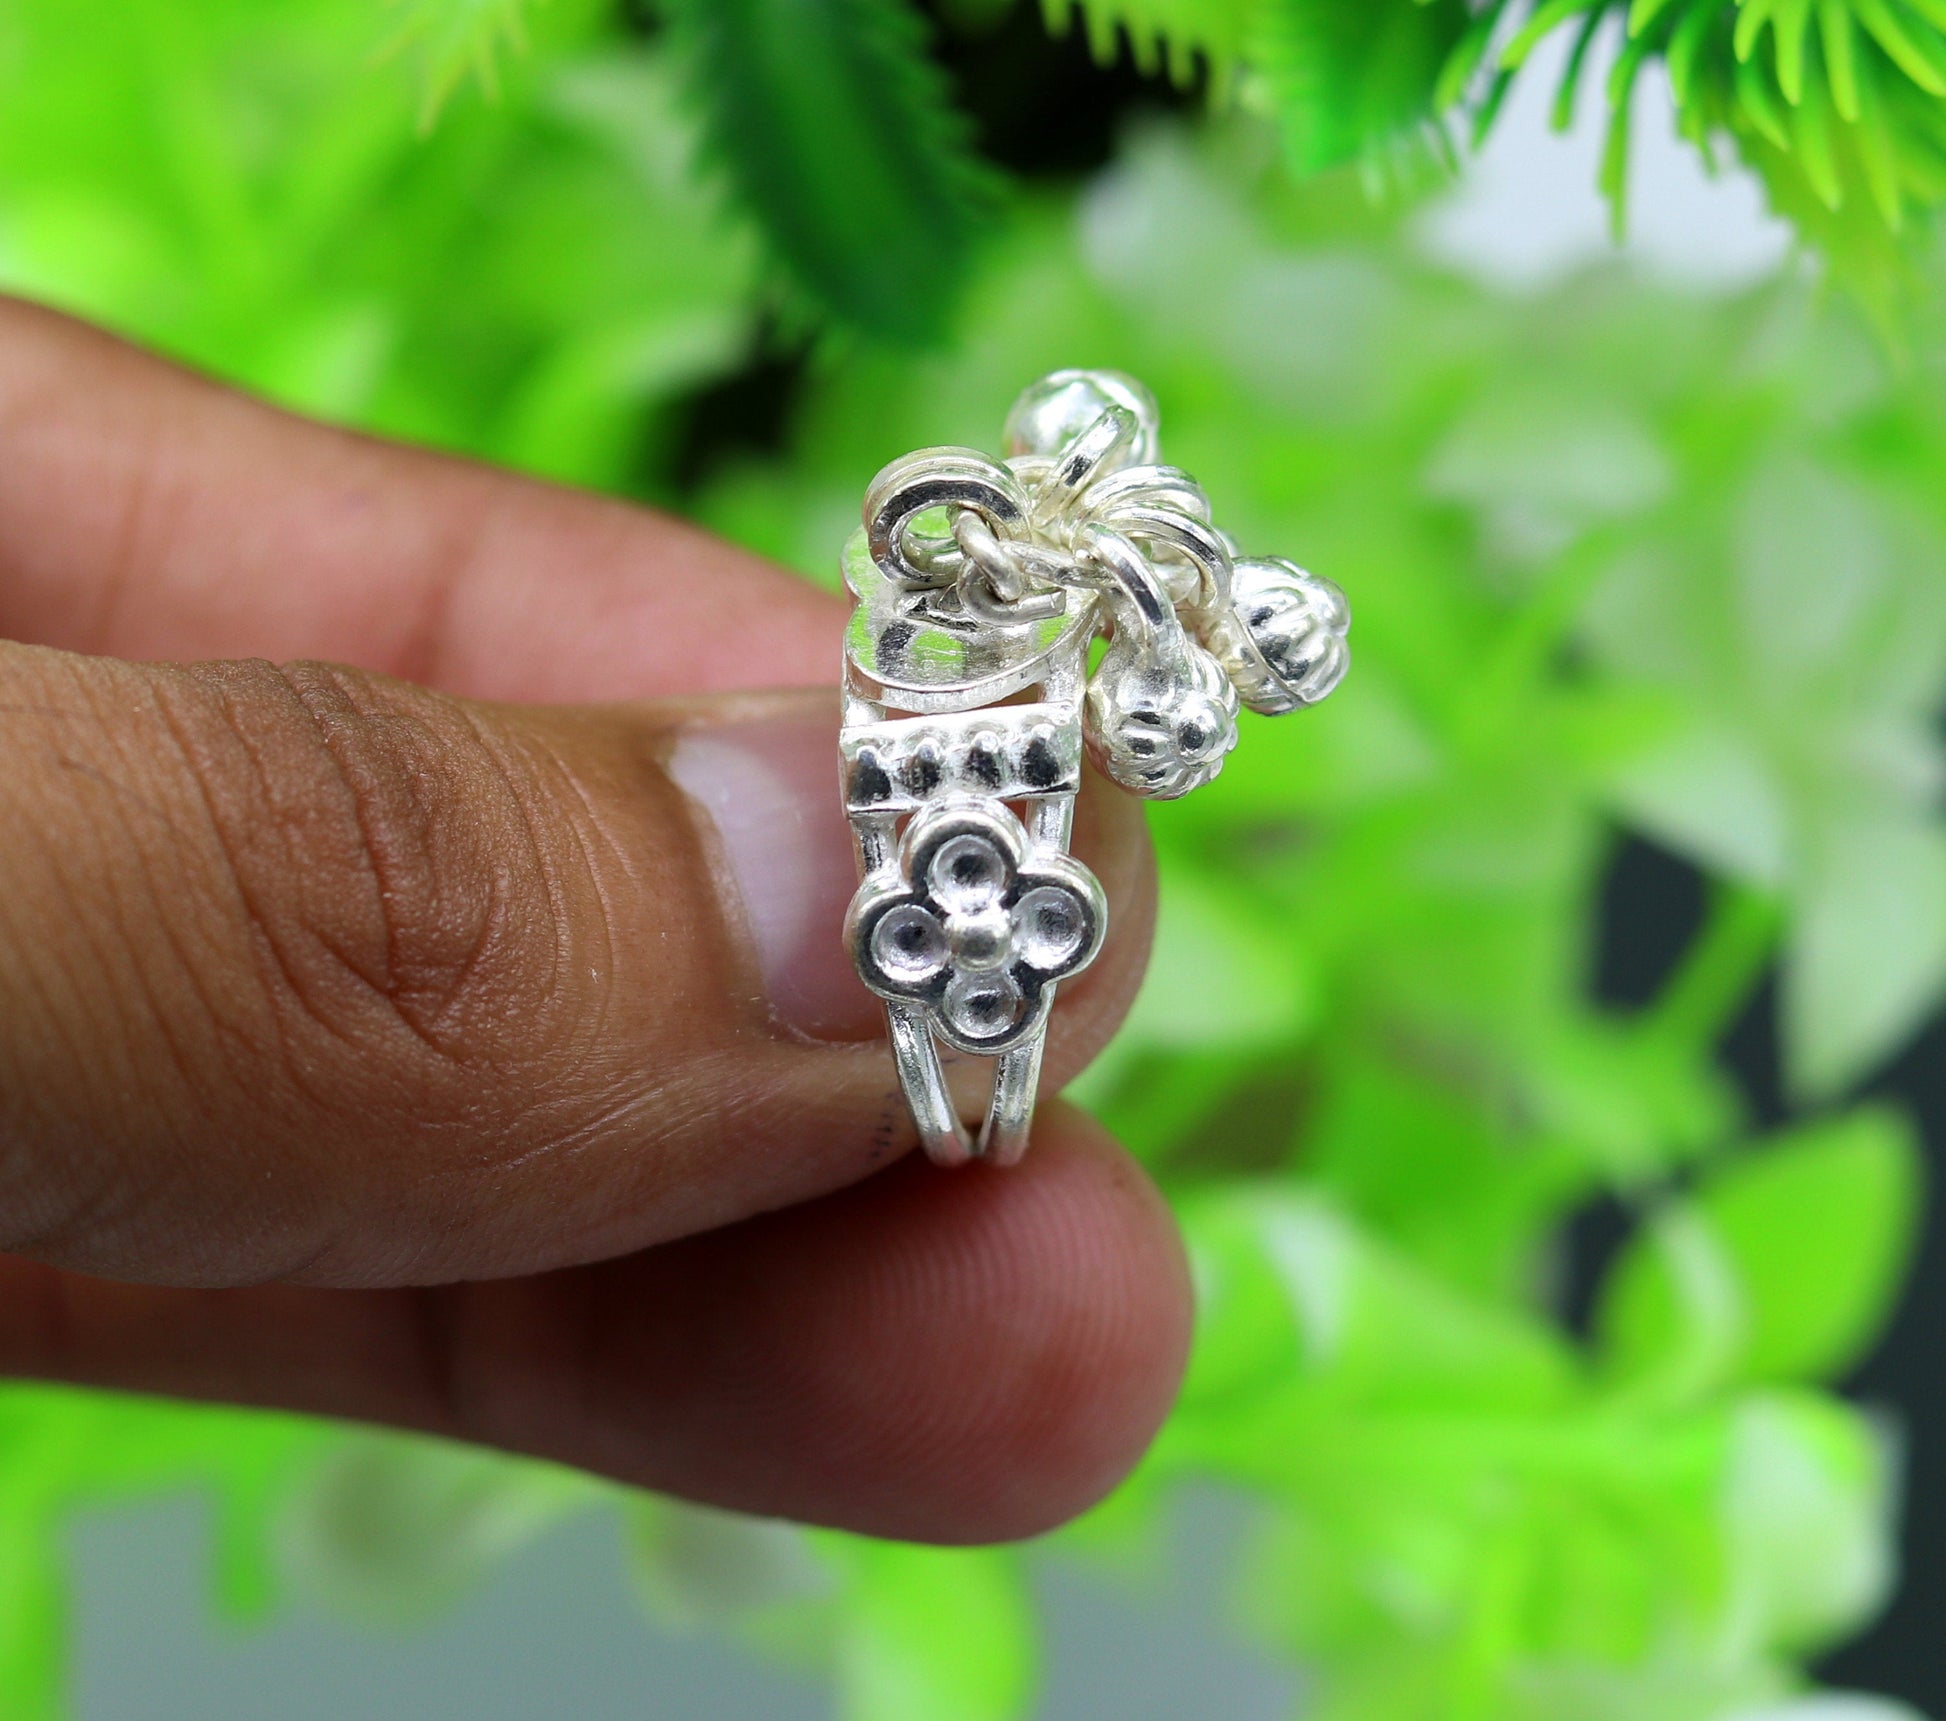 Sterling silver handmade charm ring excellent customized 6 noisy bells drops personalized bridesmaid gift for girls women's jewelry sr257 - TRIBAL ORNAMENTS